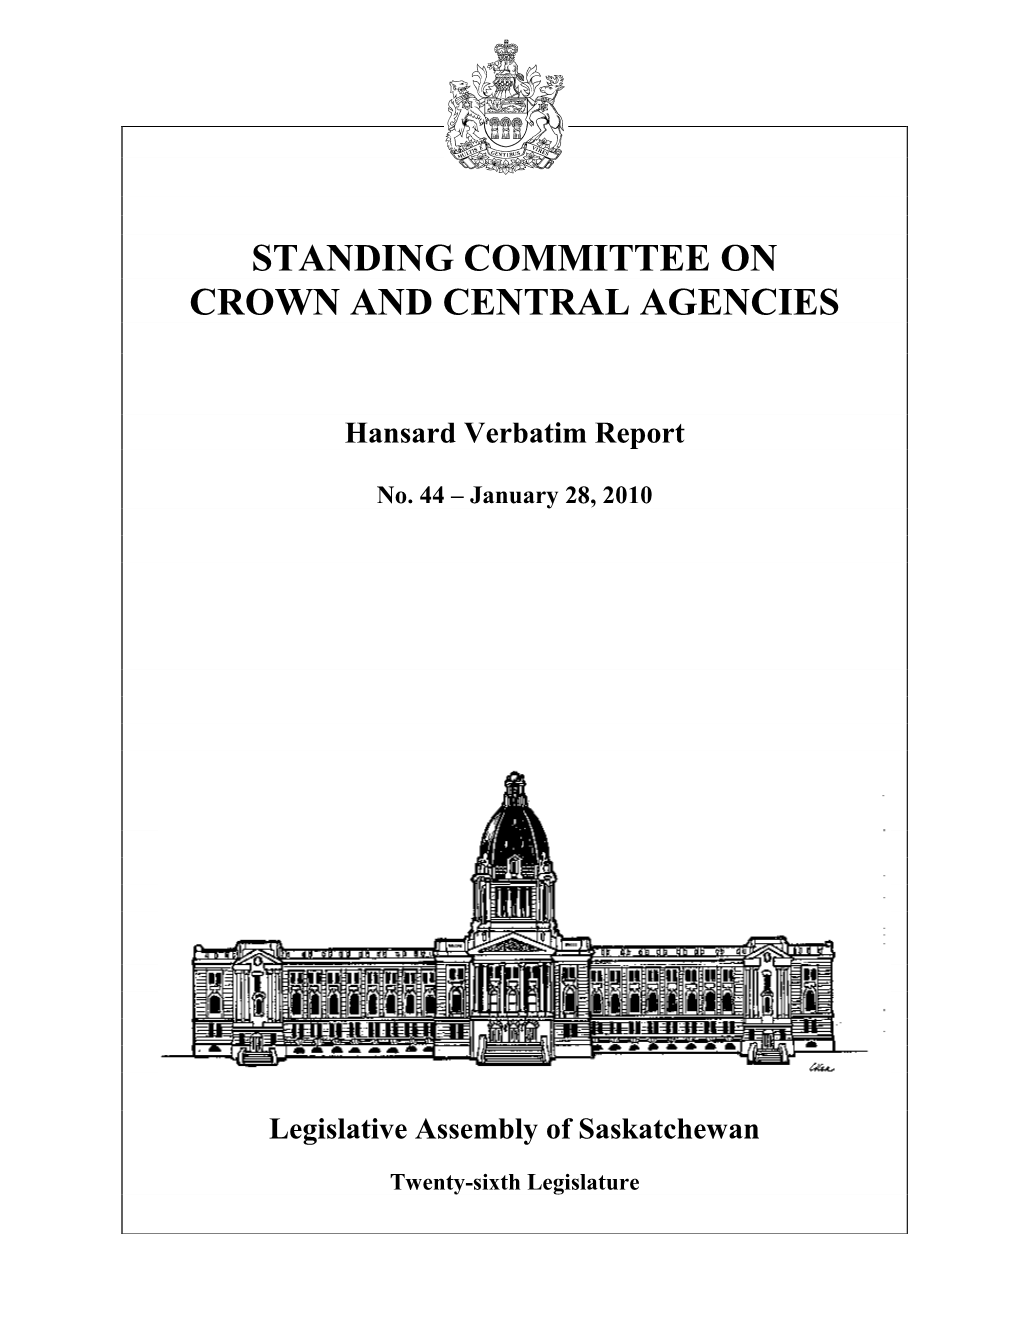 Standing Committee on Crown and Central Agencies